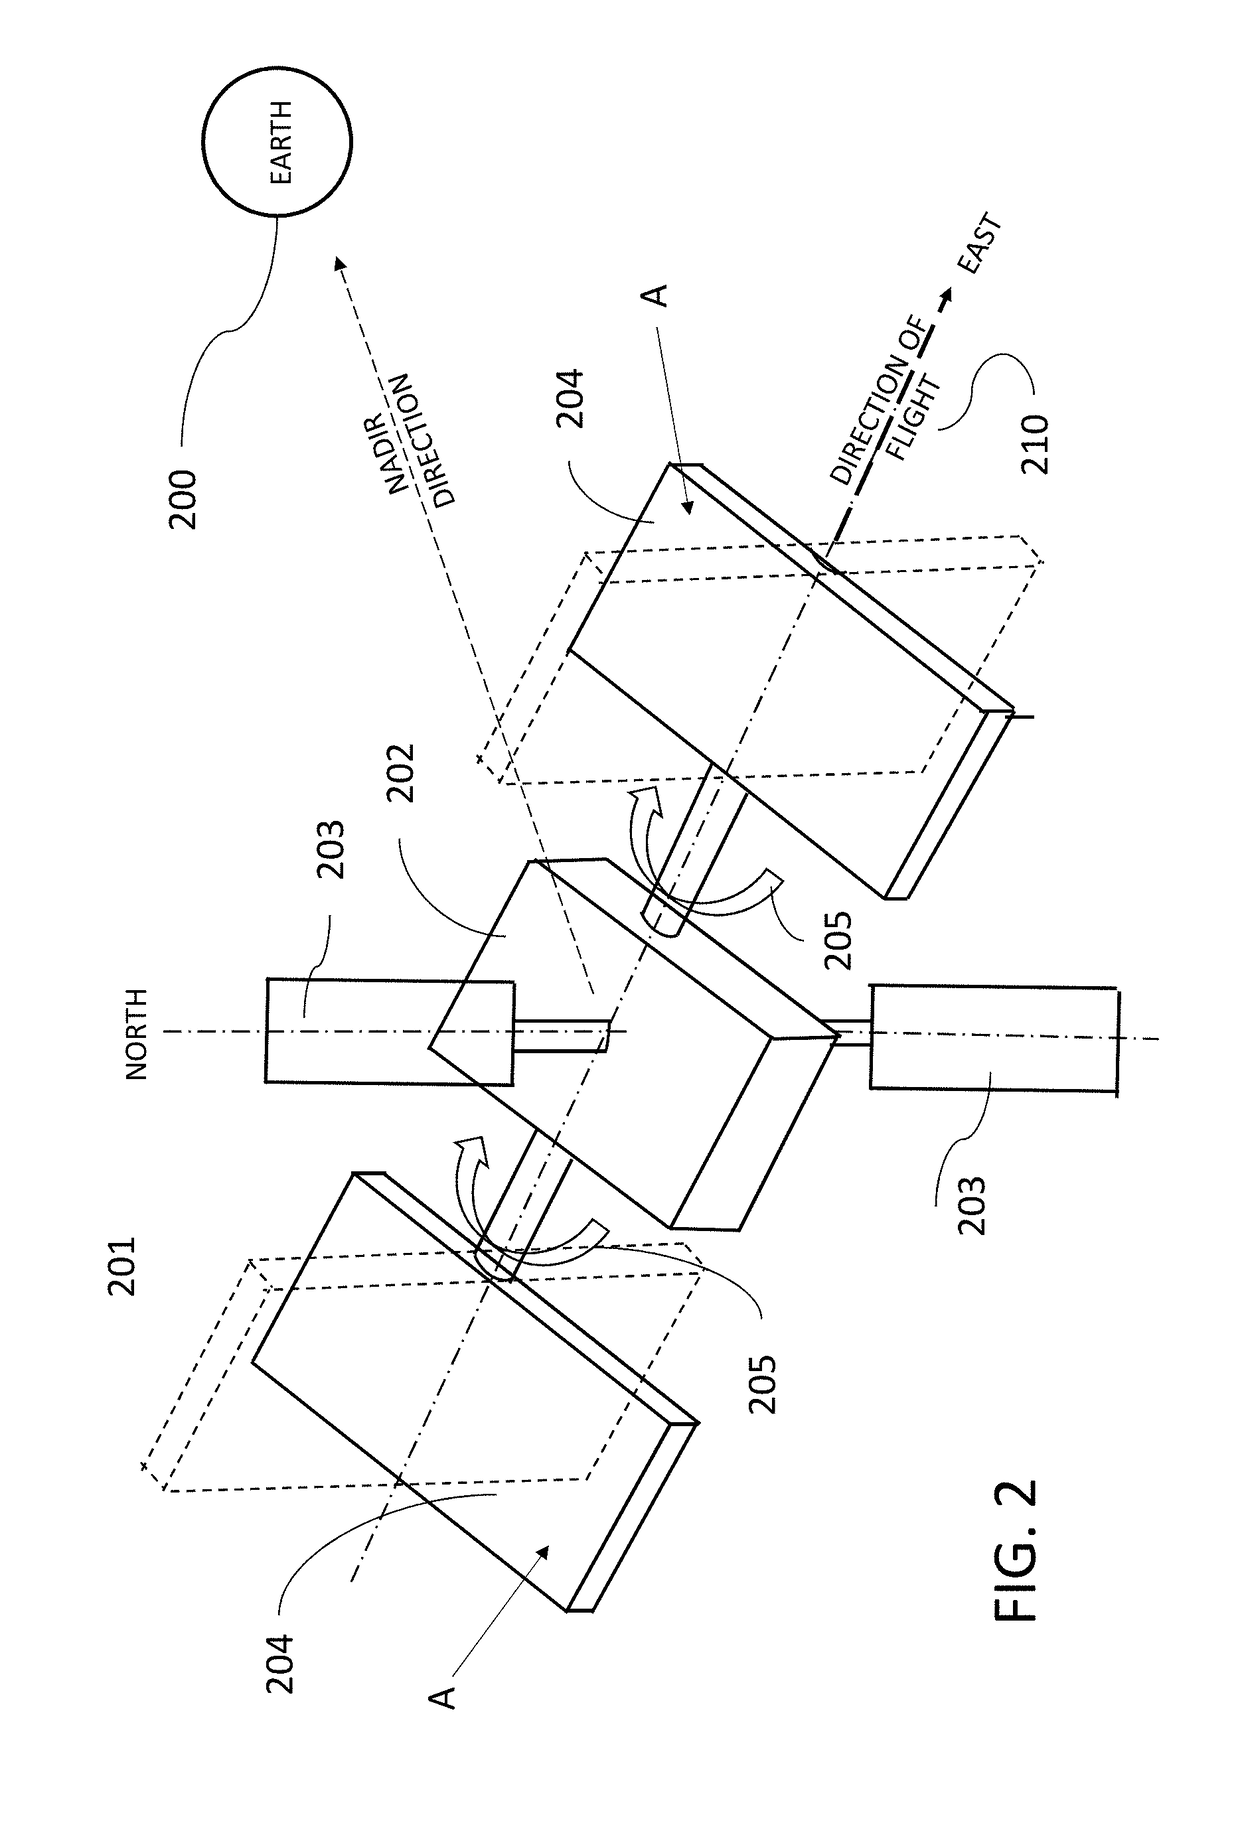 Apparatus and Methods for Orbital Sensing and Debris Removal